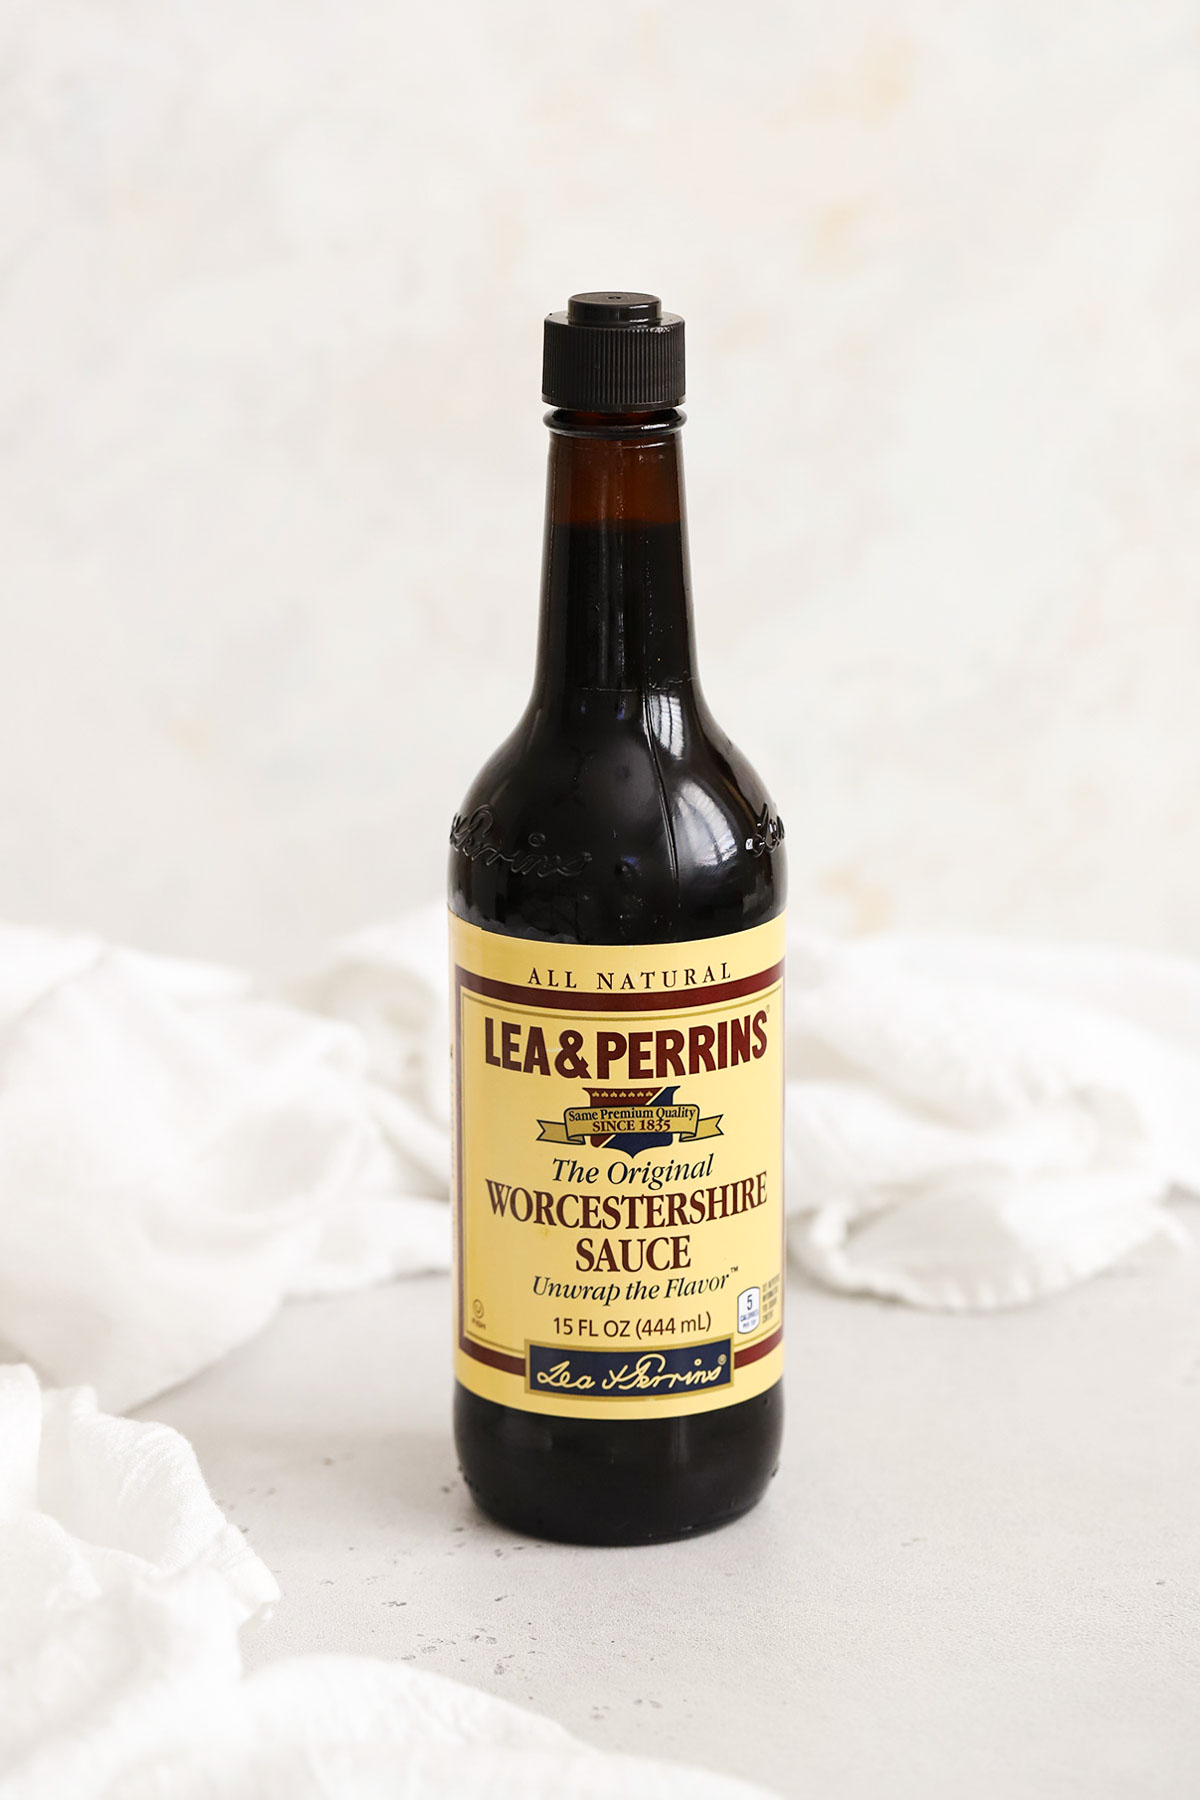 Is Worcestershire Sauce Gluten-Free? (These Ones Are!)